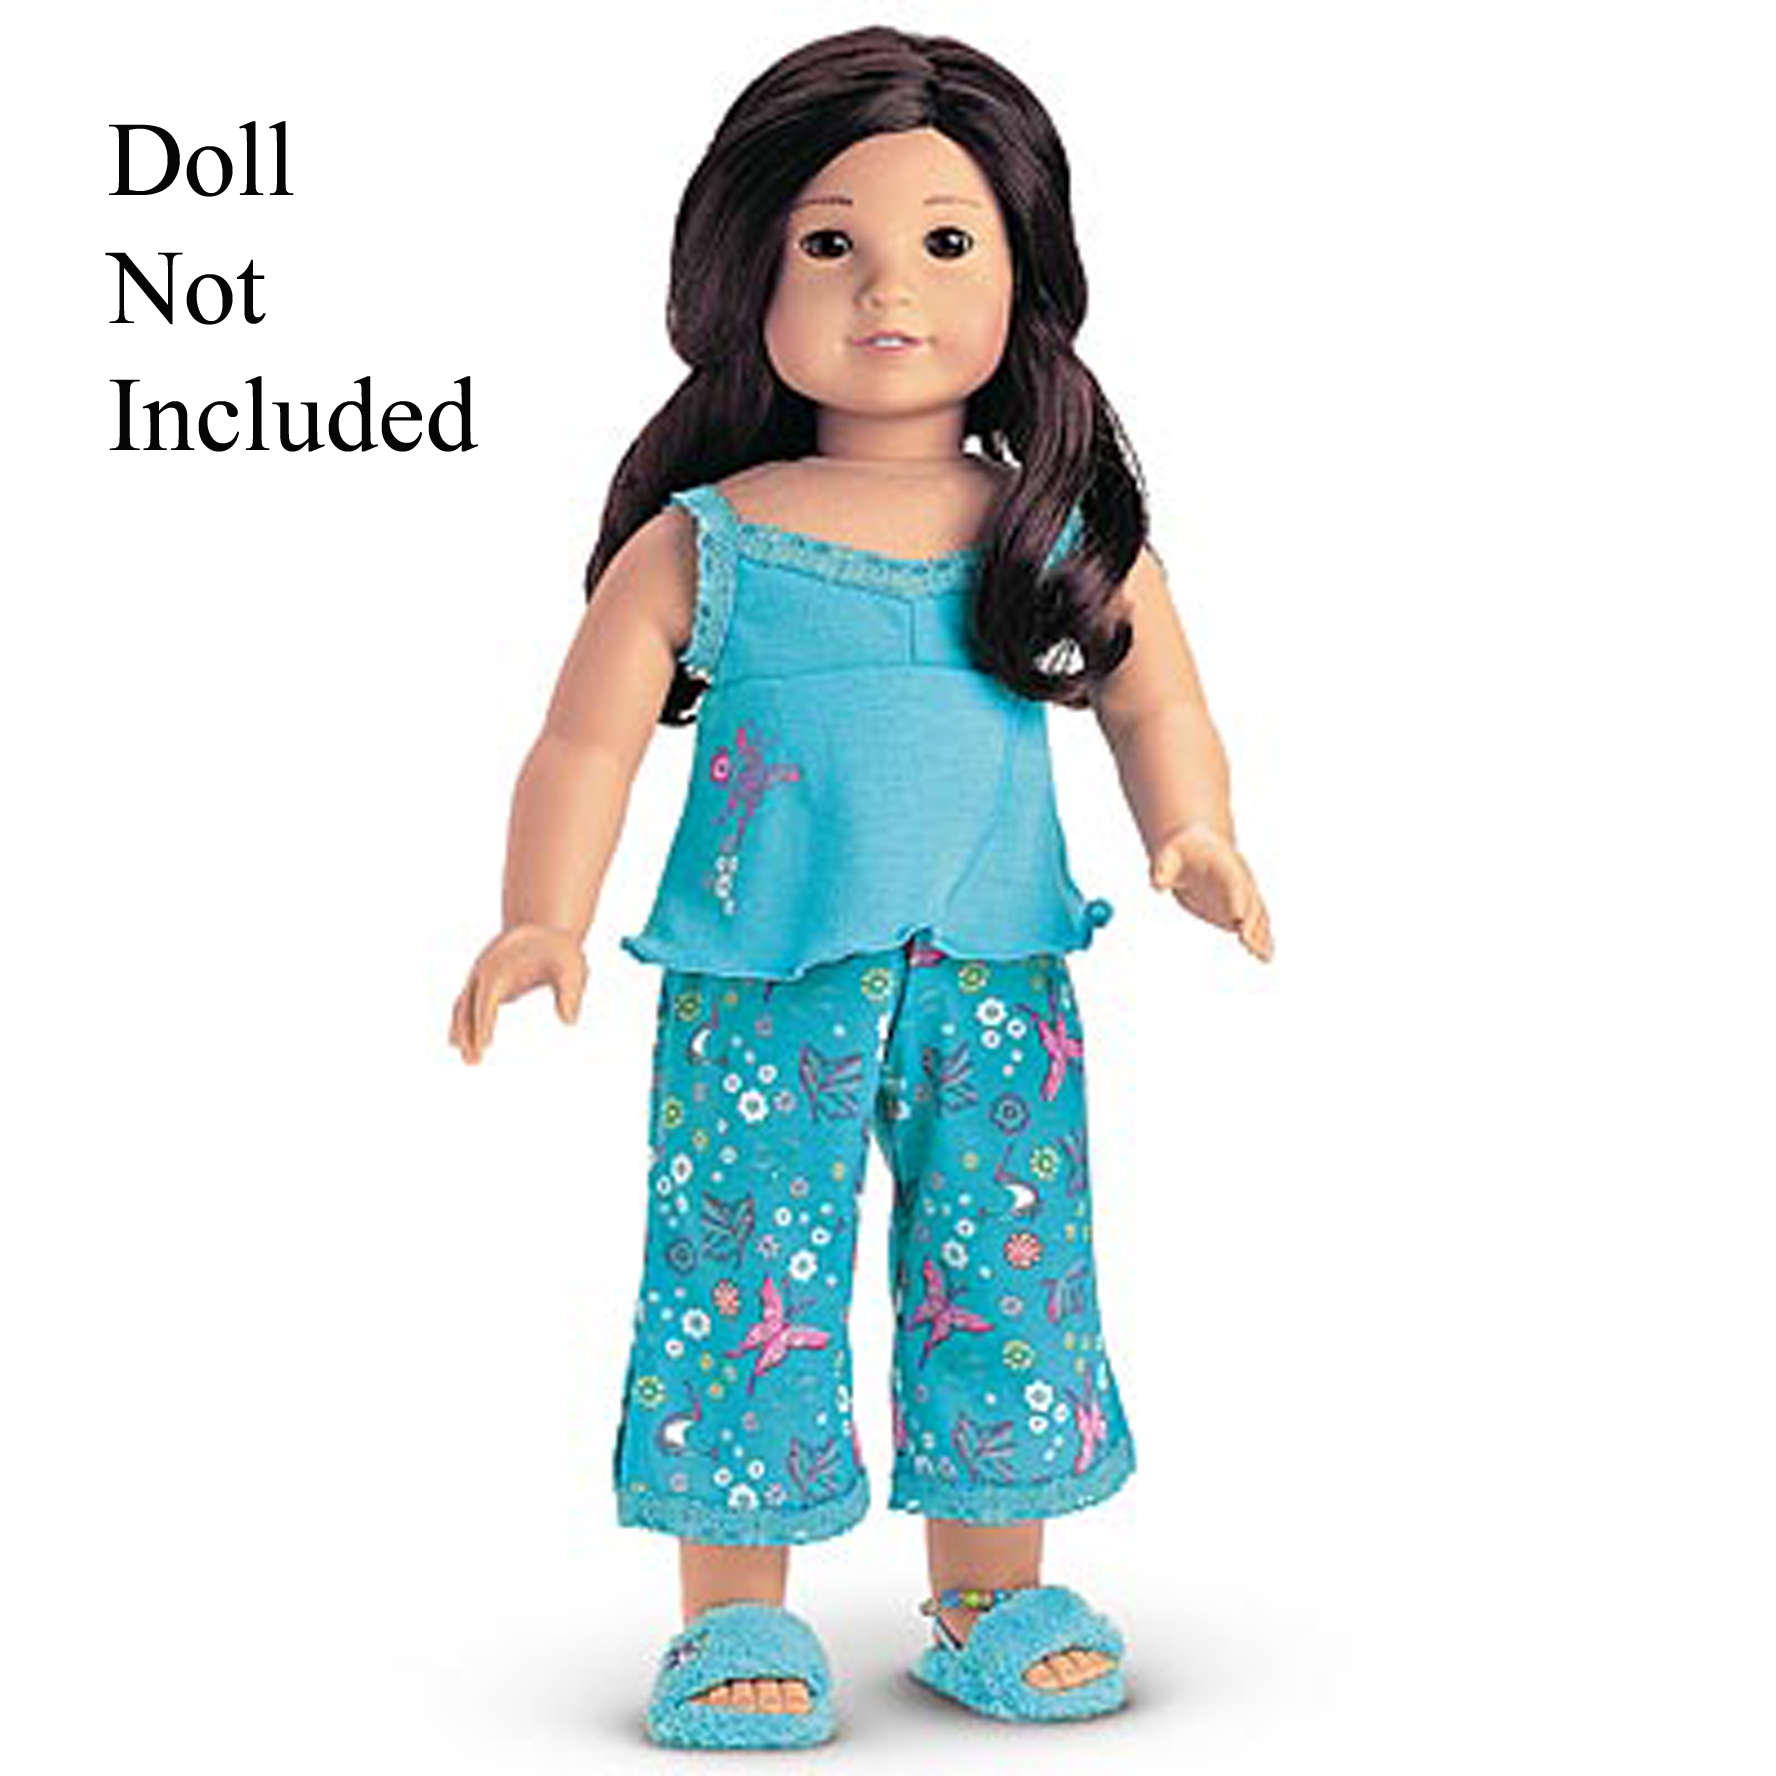 american girl doll of the year 2006